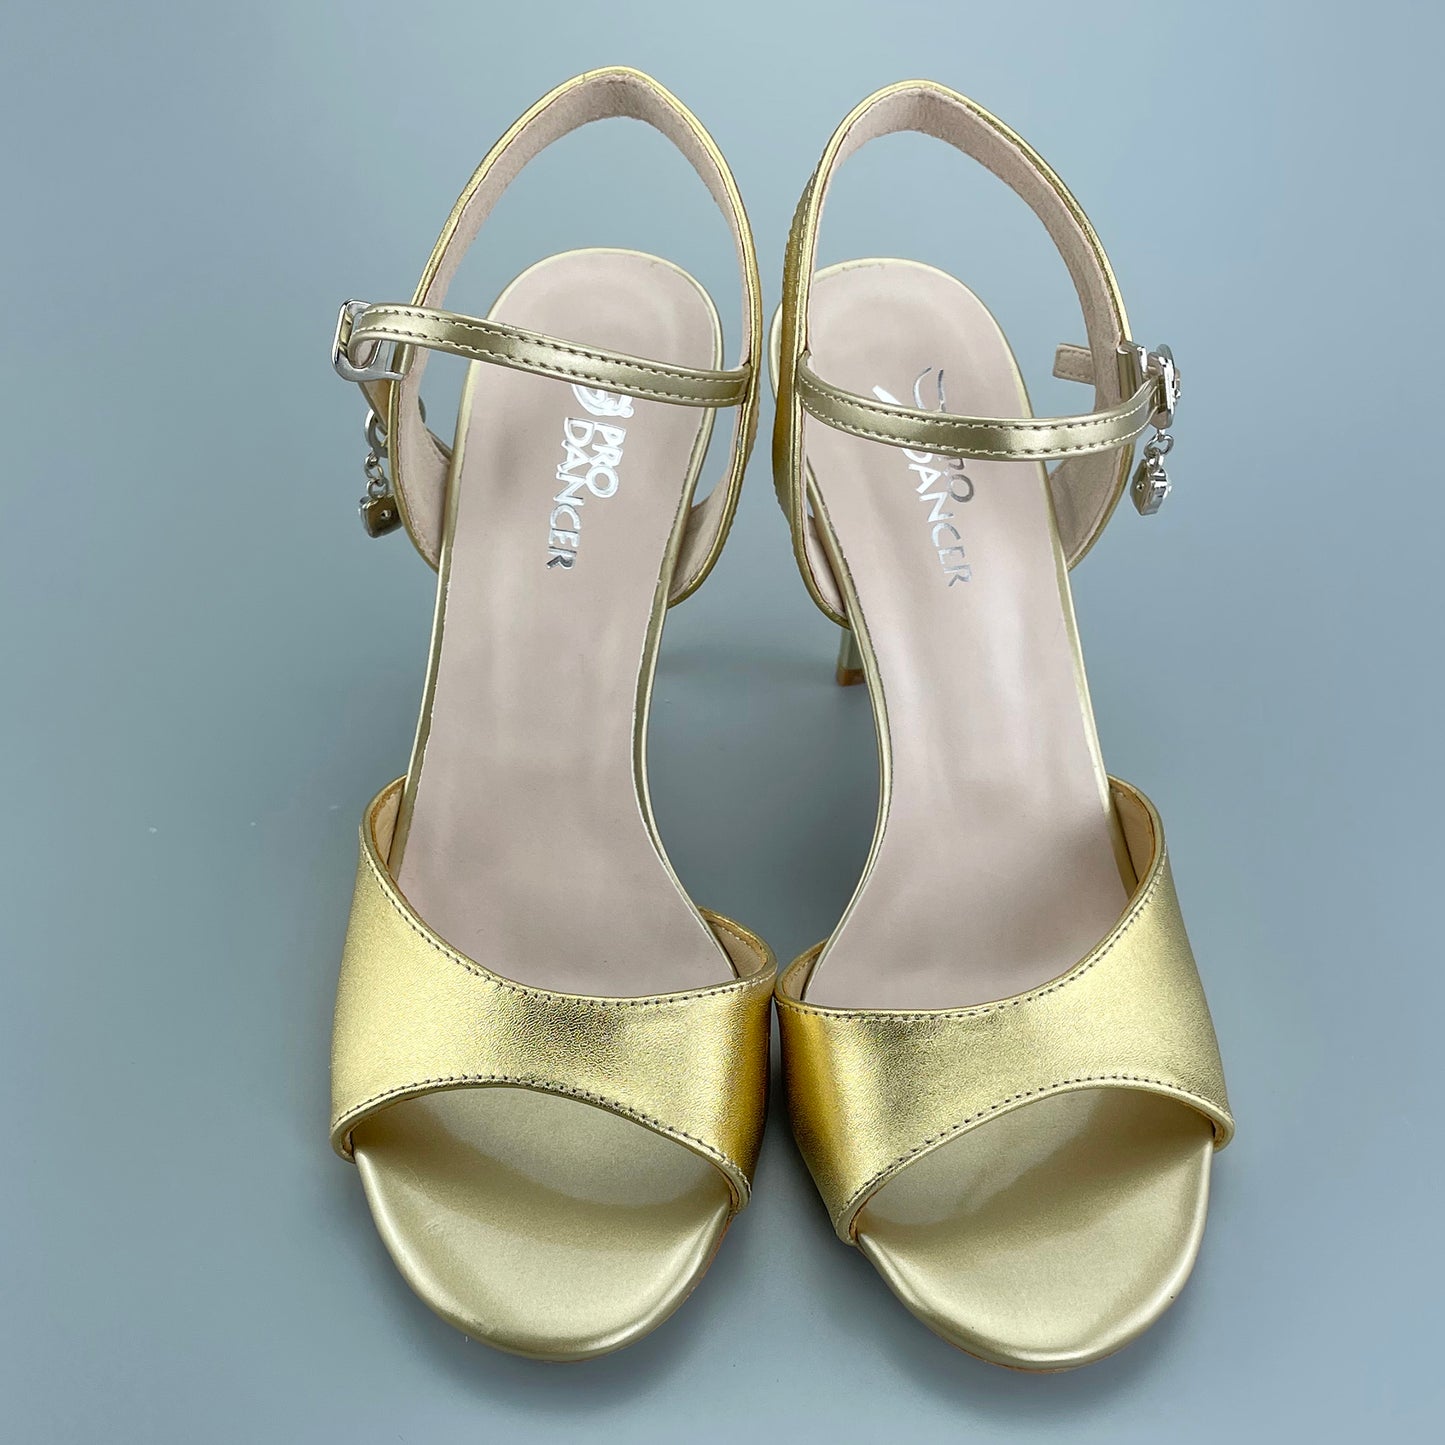 Pro Dancer Open-toe and Open-back Argentine Tango Shoes High Salsa Heels Hard Leather Sole Sandals Gold (PD-9044A)